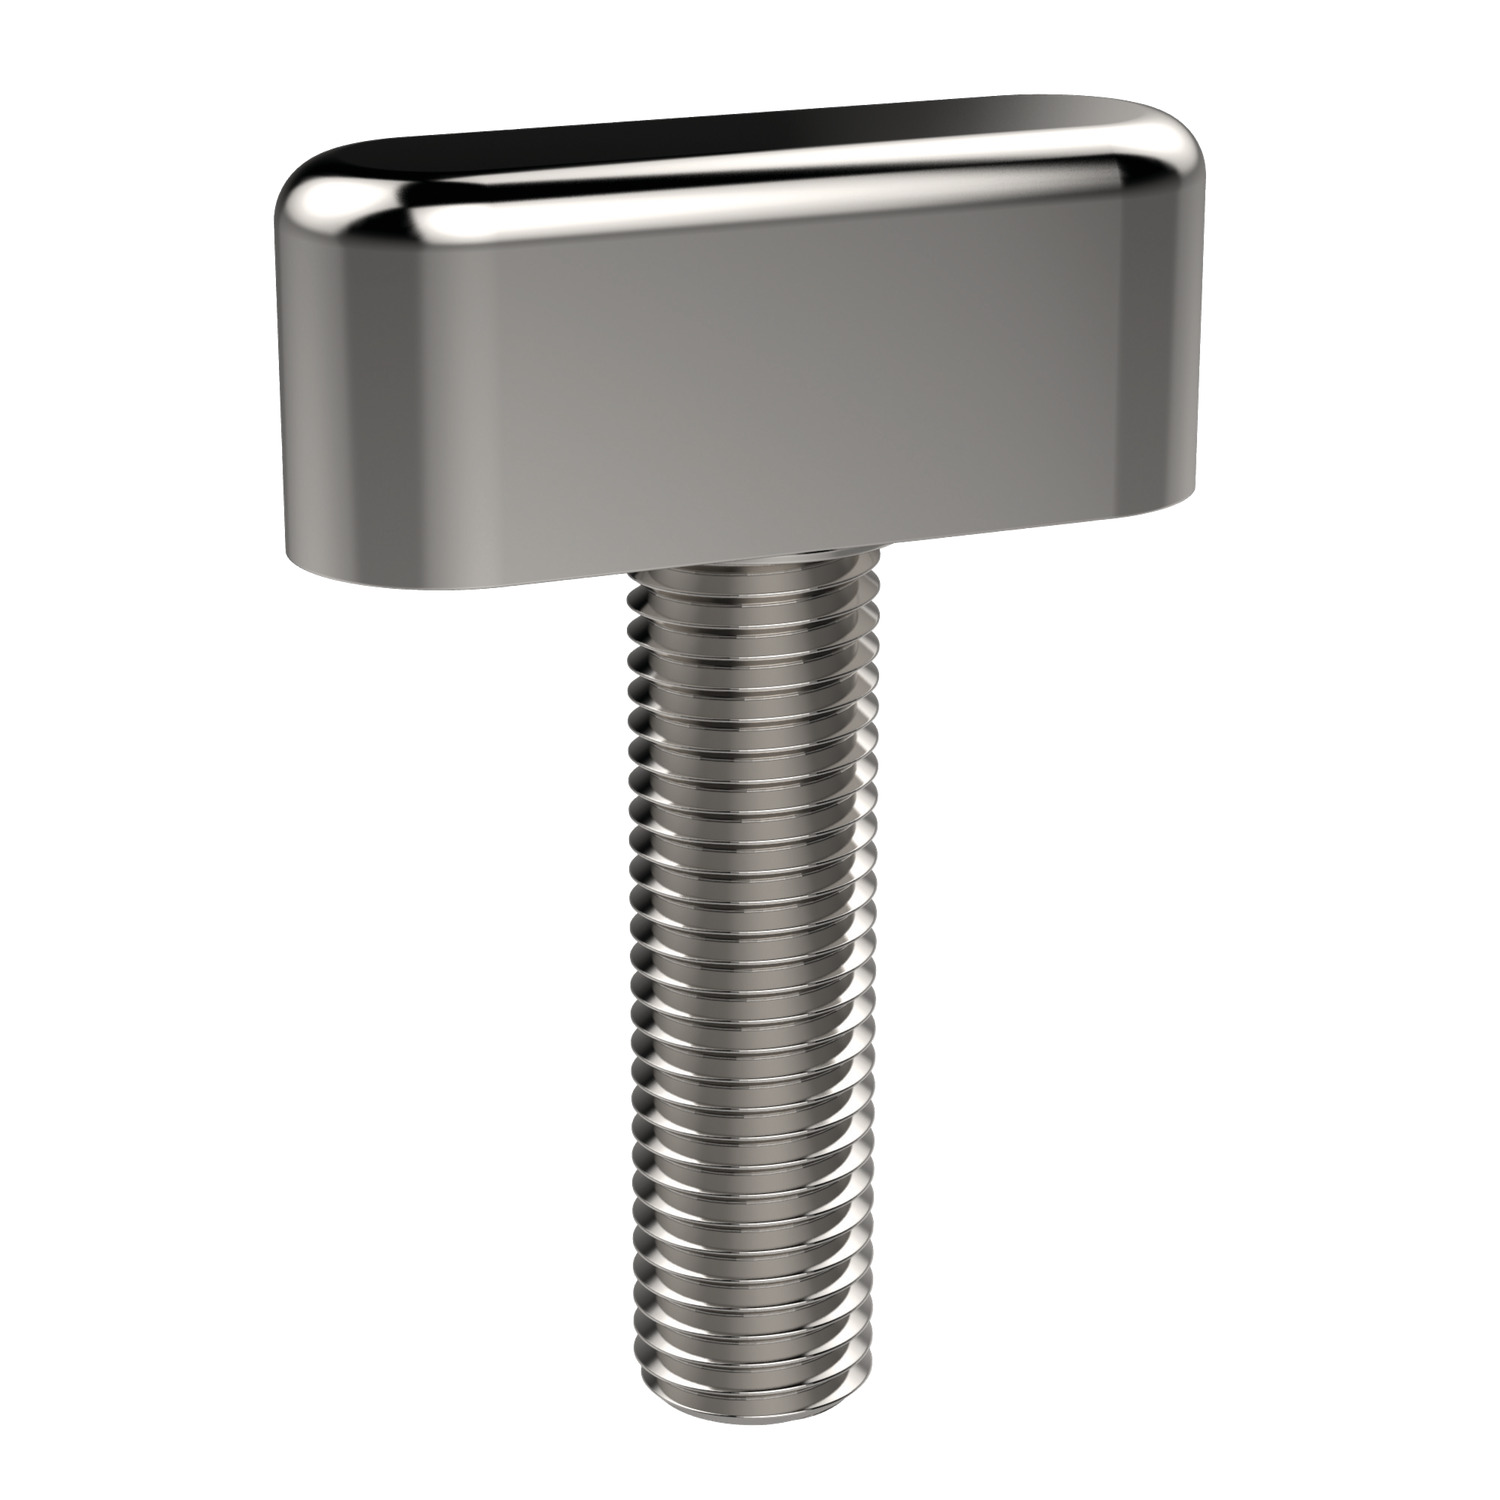 Product 37380, Quarter Turn Screw, Male stainless steel / 